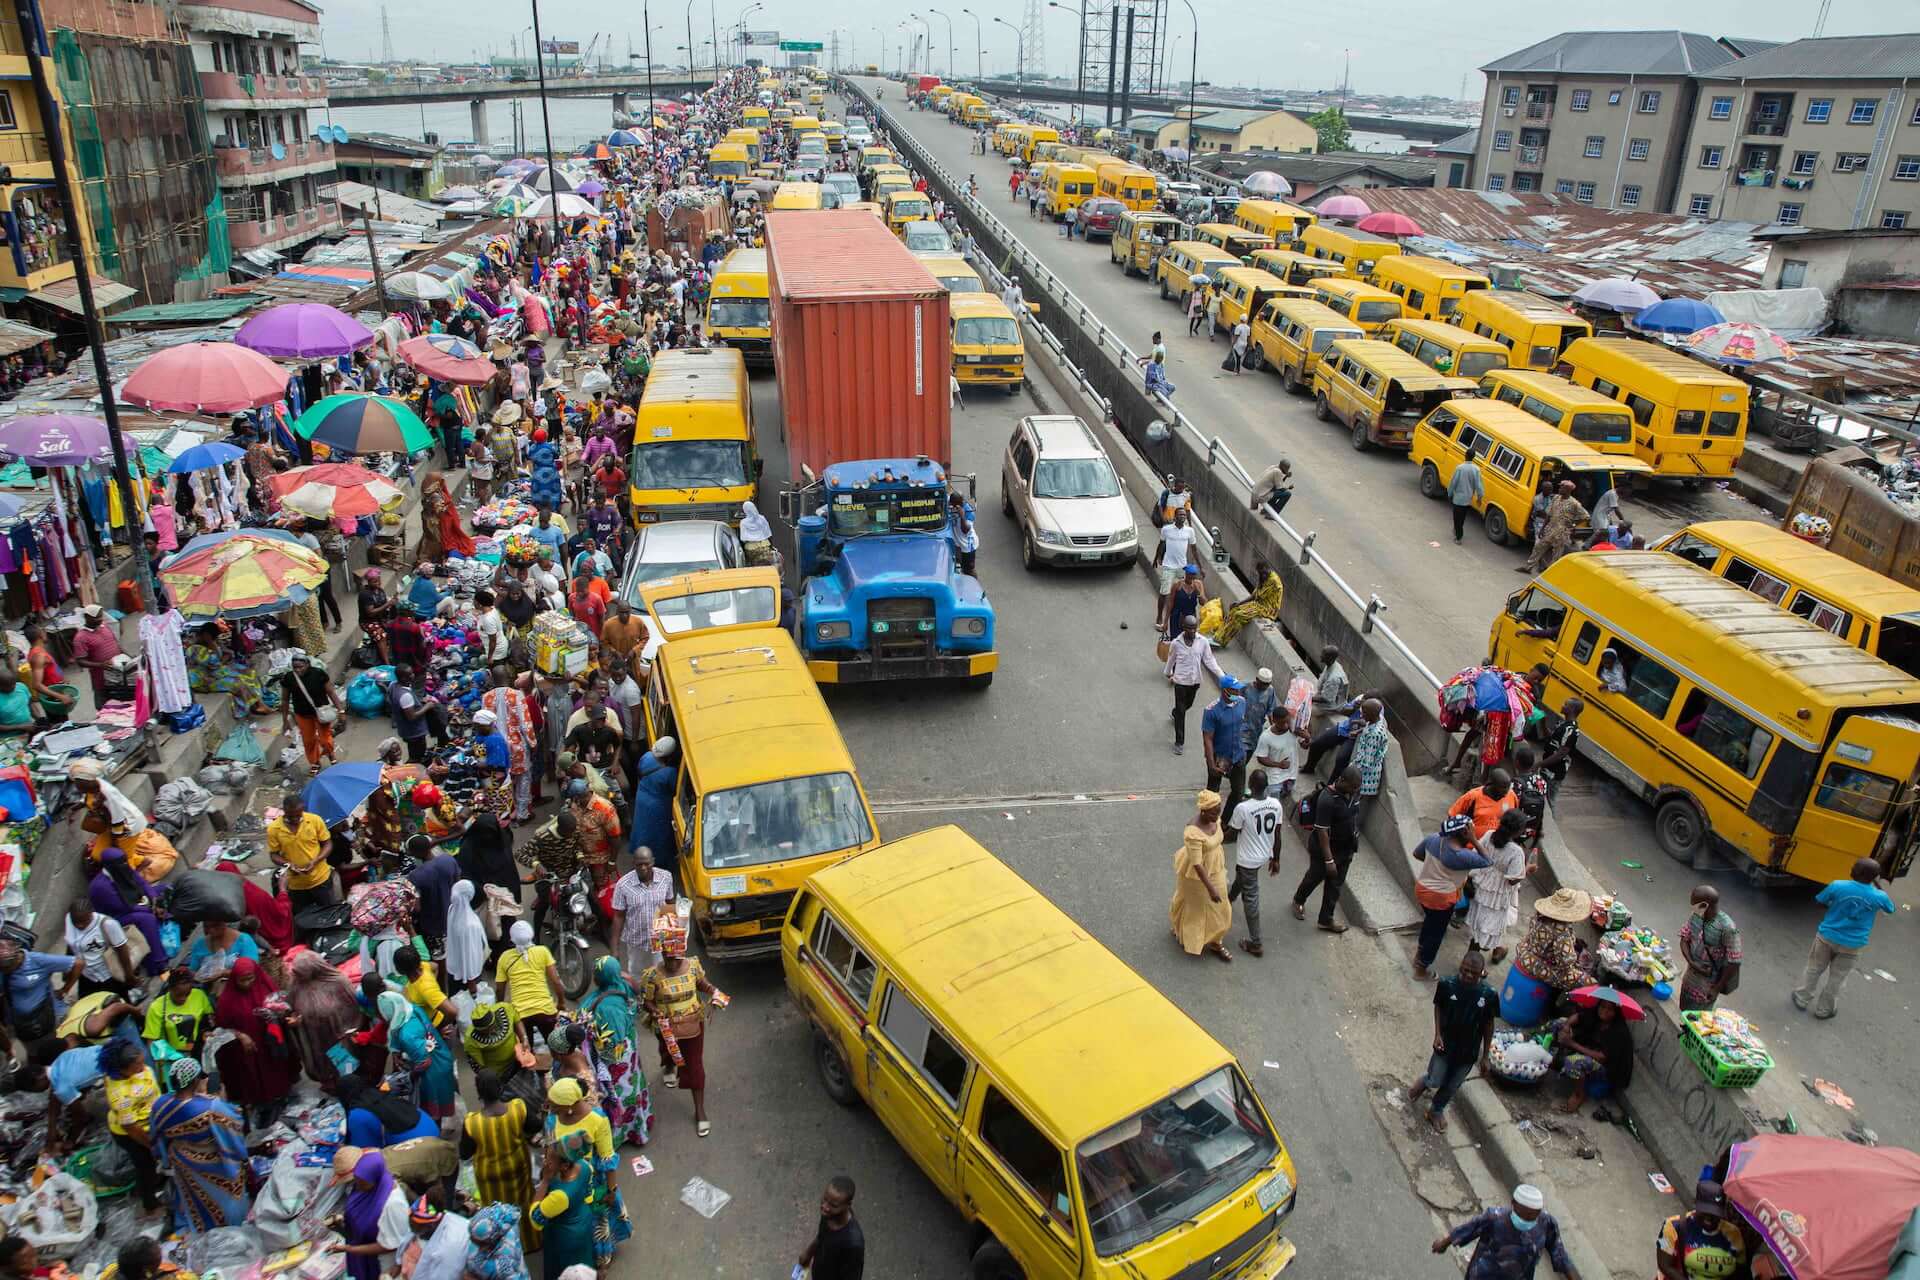 A busy, congested street in Lagos filled with yellow buses and a truck, as well as pedestrians and vendors.